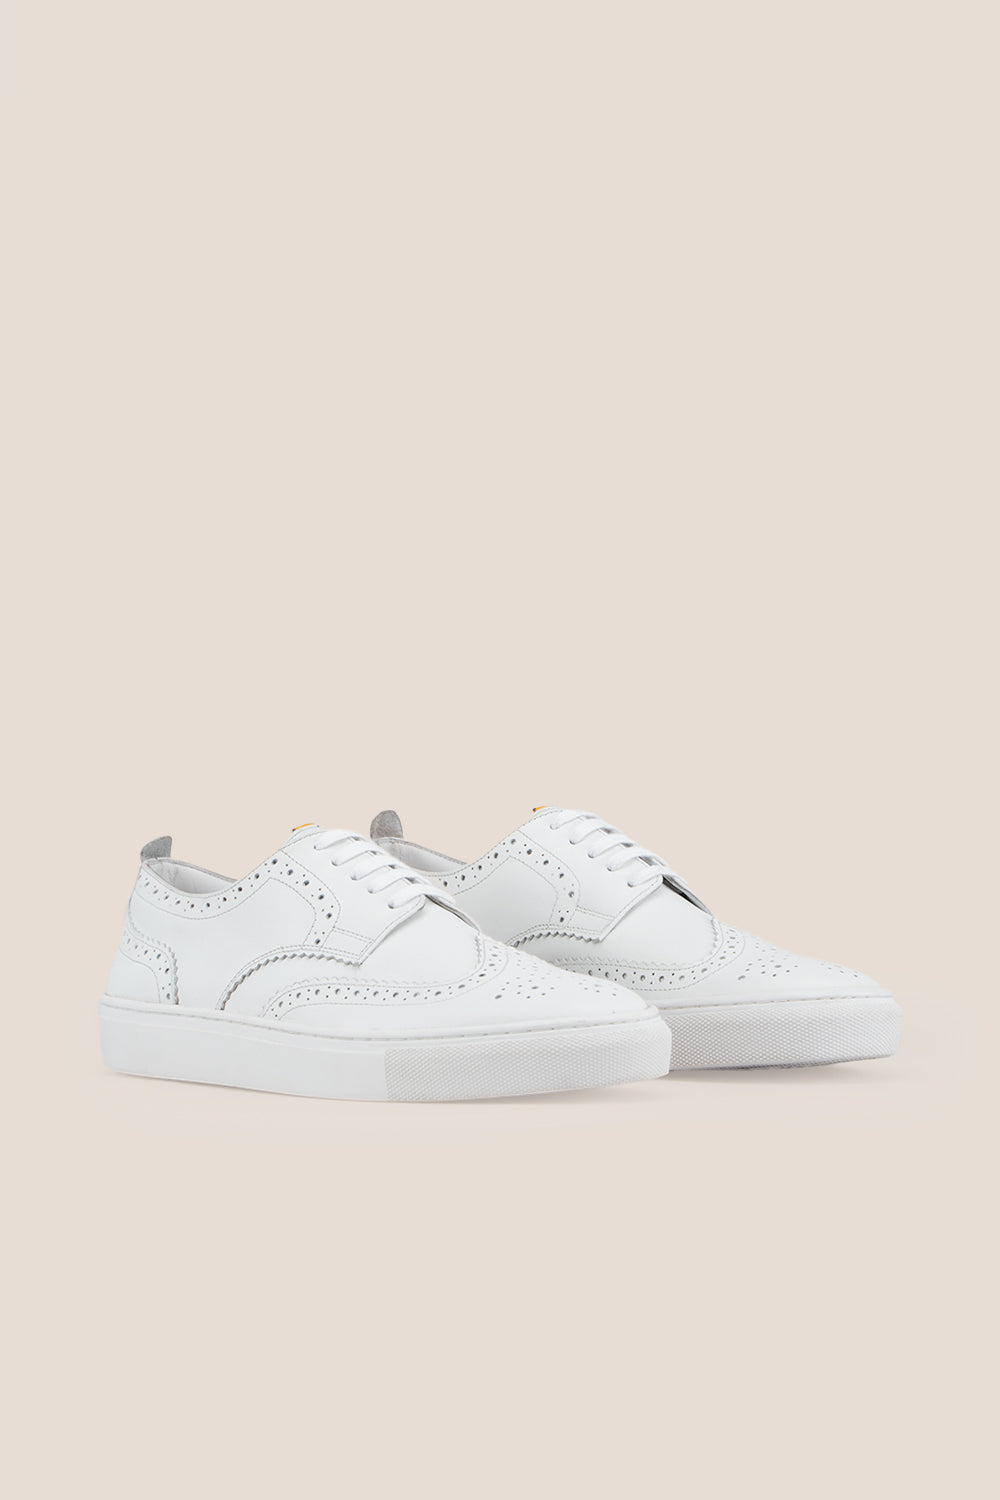 Why Every Man Needs a Pair of White Leather Sneakers in His Wardrobe